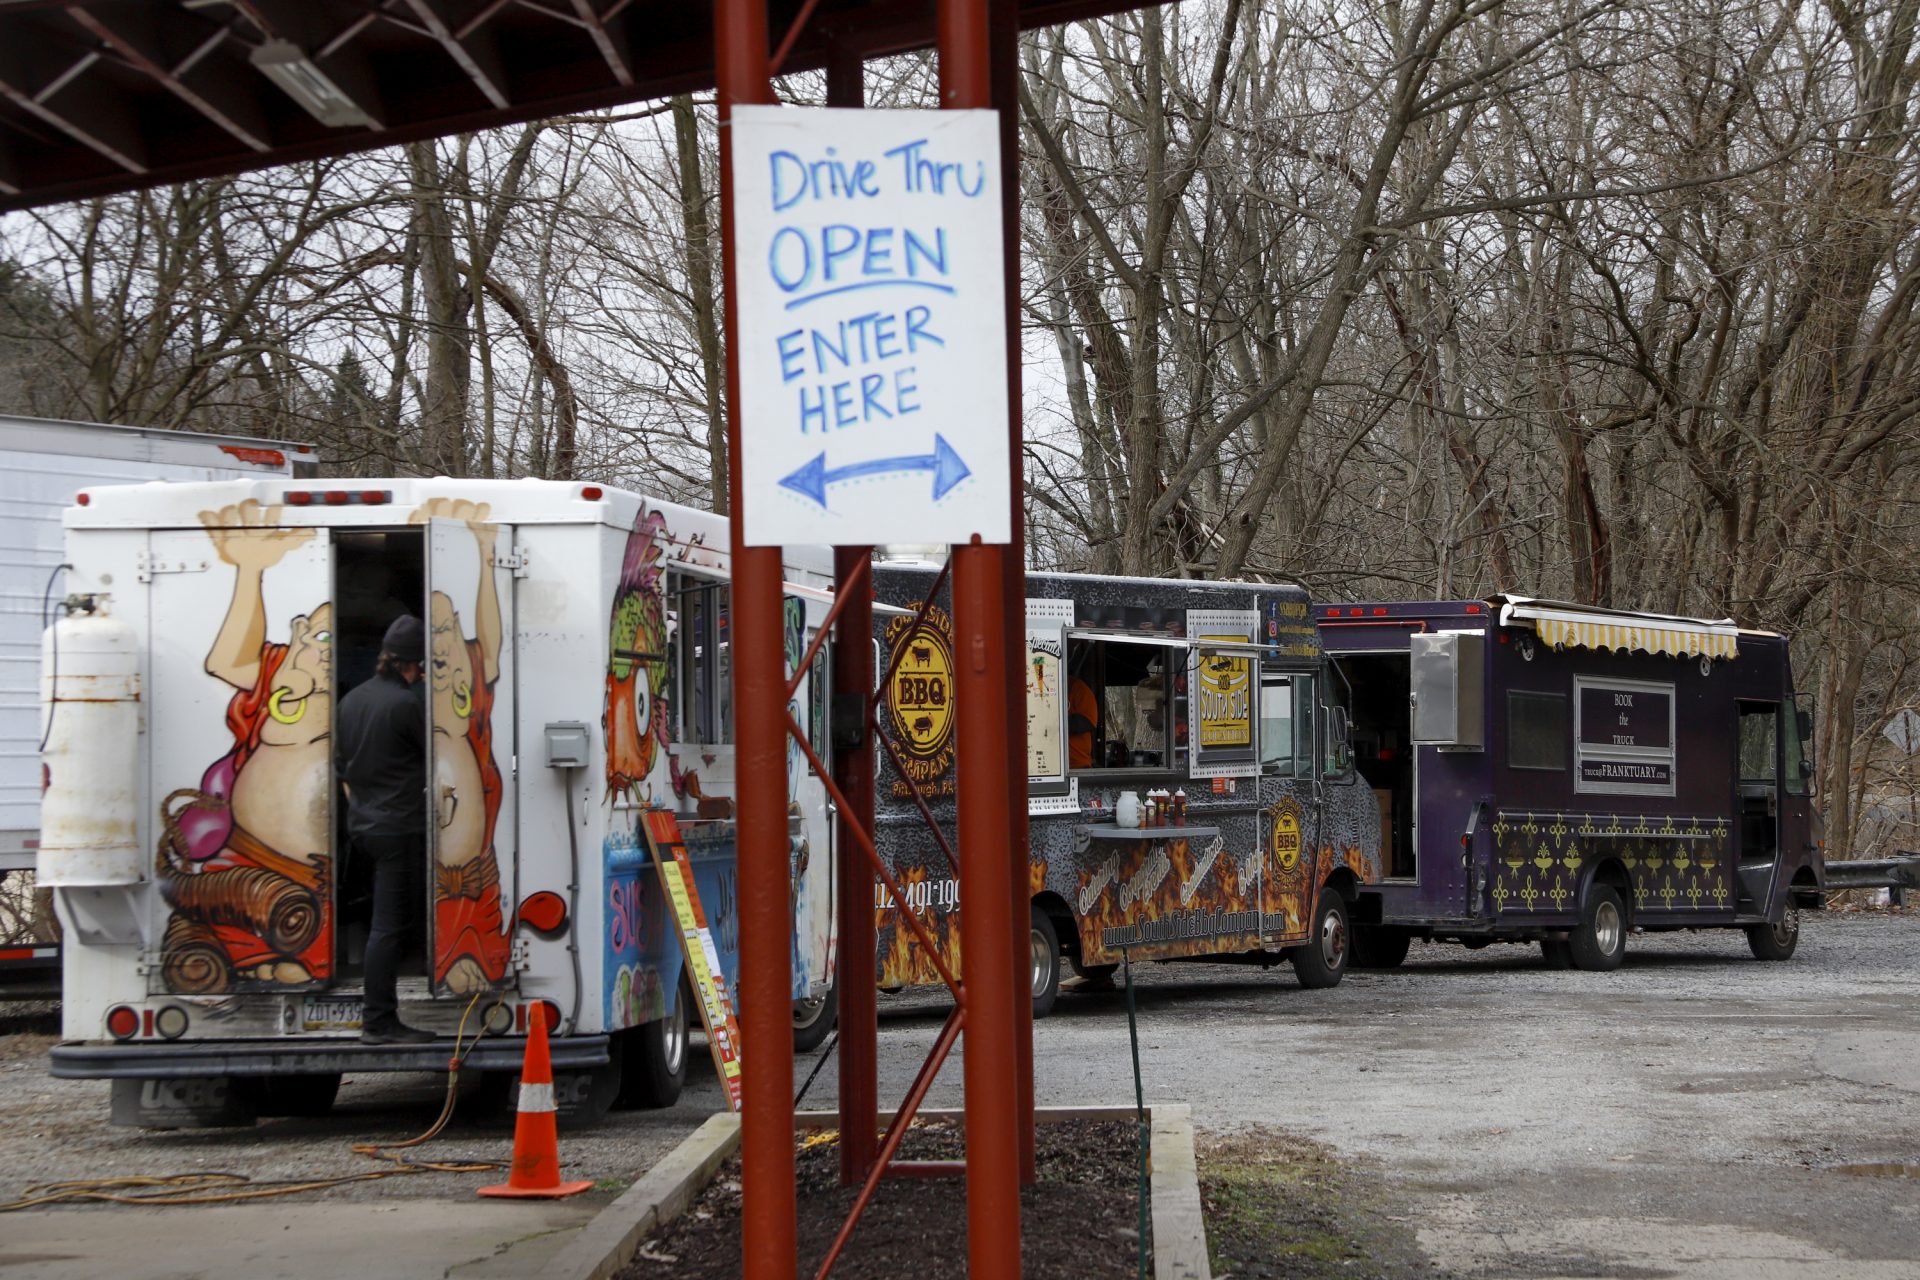 Three food trucks line up in a lot for people to buy take out dinners, Thursday, March 19, 2020, in the Ross Township suburb of Pittsburgh. They we giving people an option since restaurants with indoor dining areas are closed in efforts to slow the spread of COVID-19.